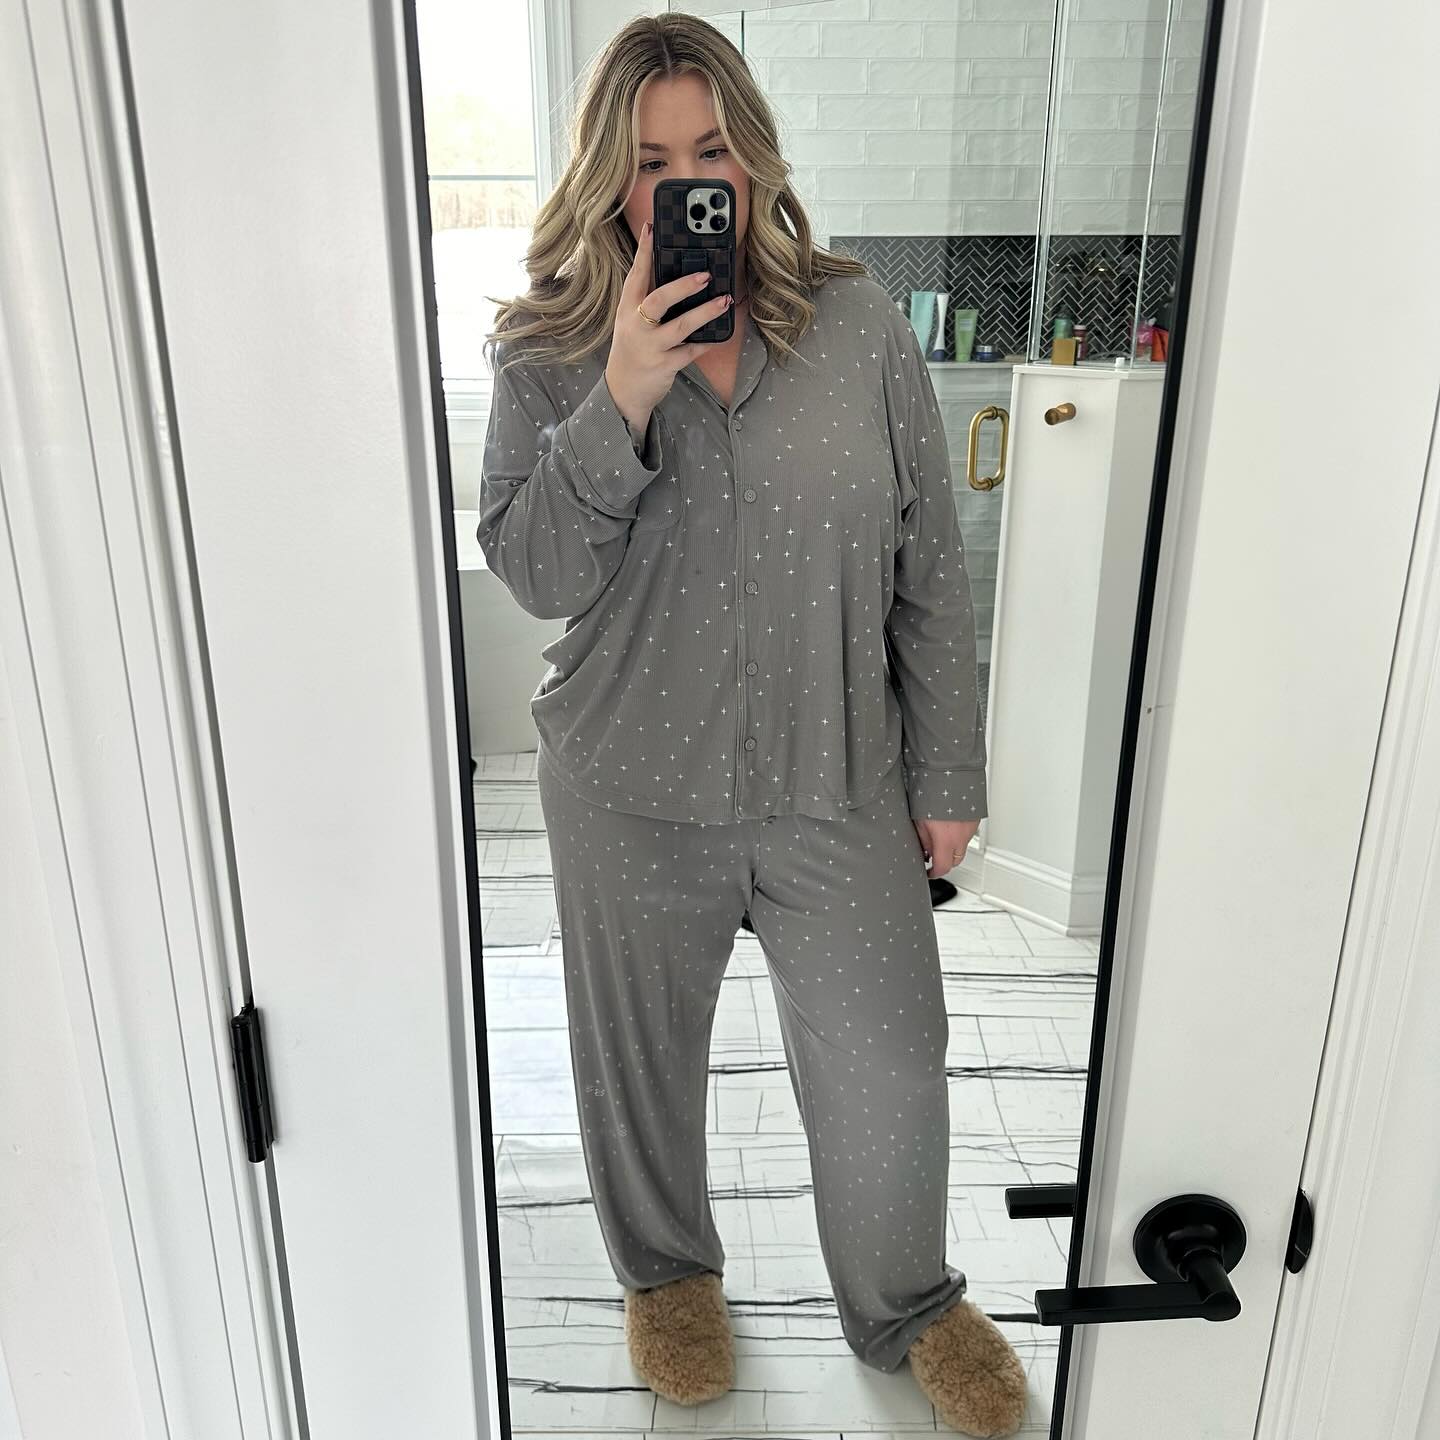 Fan complimented Kailyn's style choices as well as her post-baby body